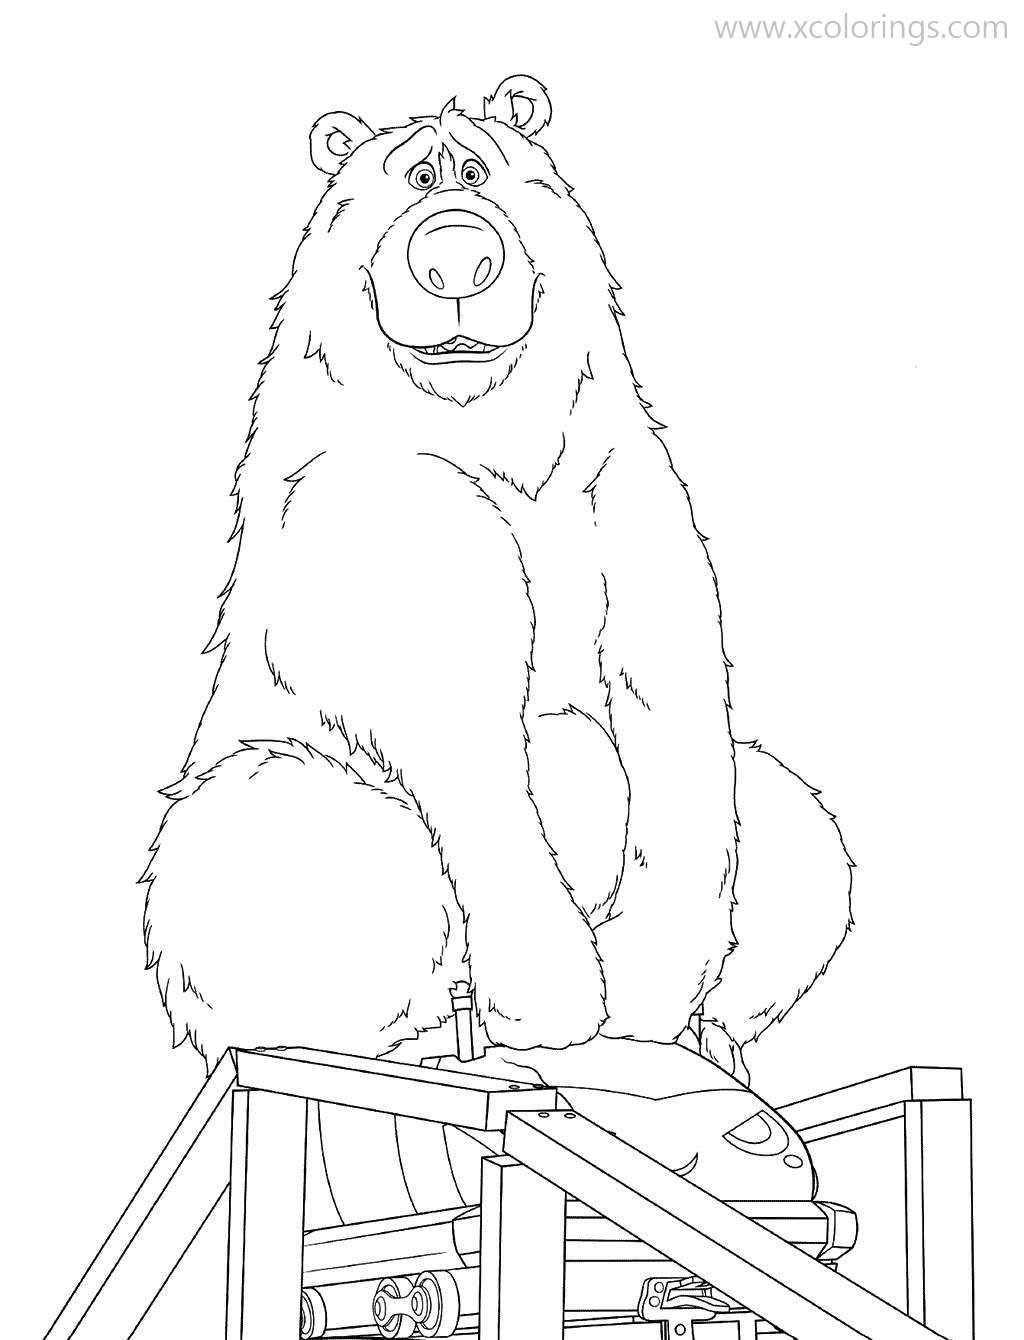 Free Wonder Park Coloring Pages Boomer printable